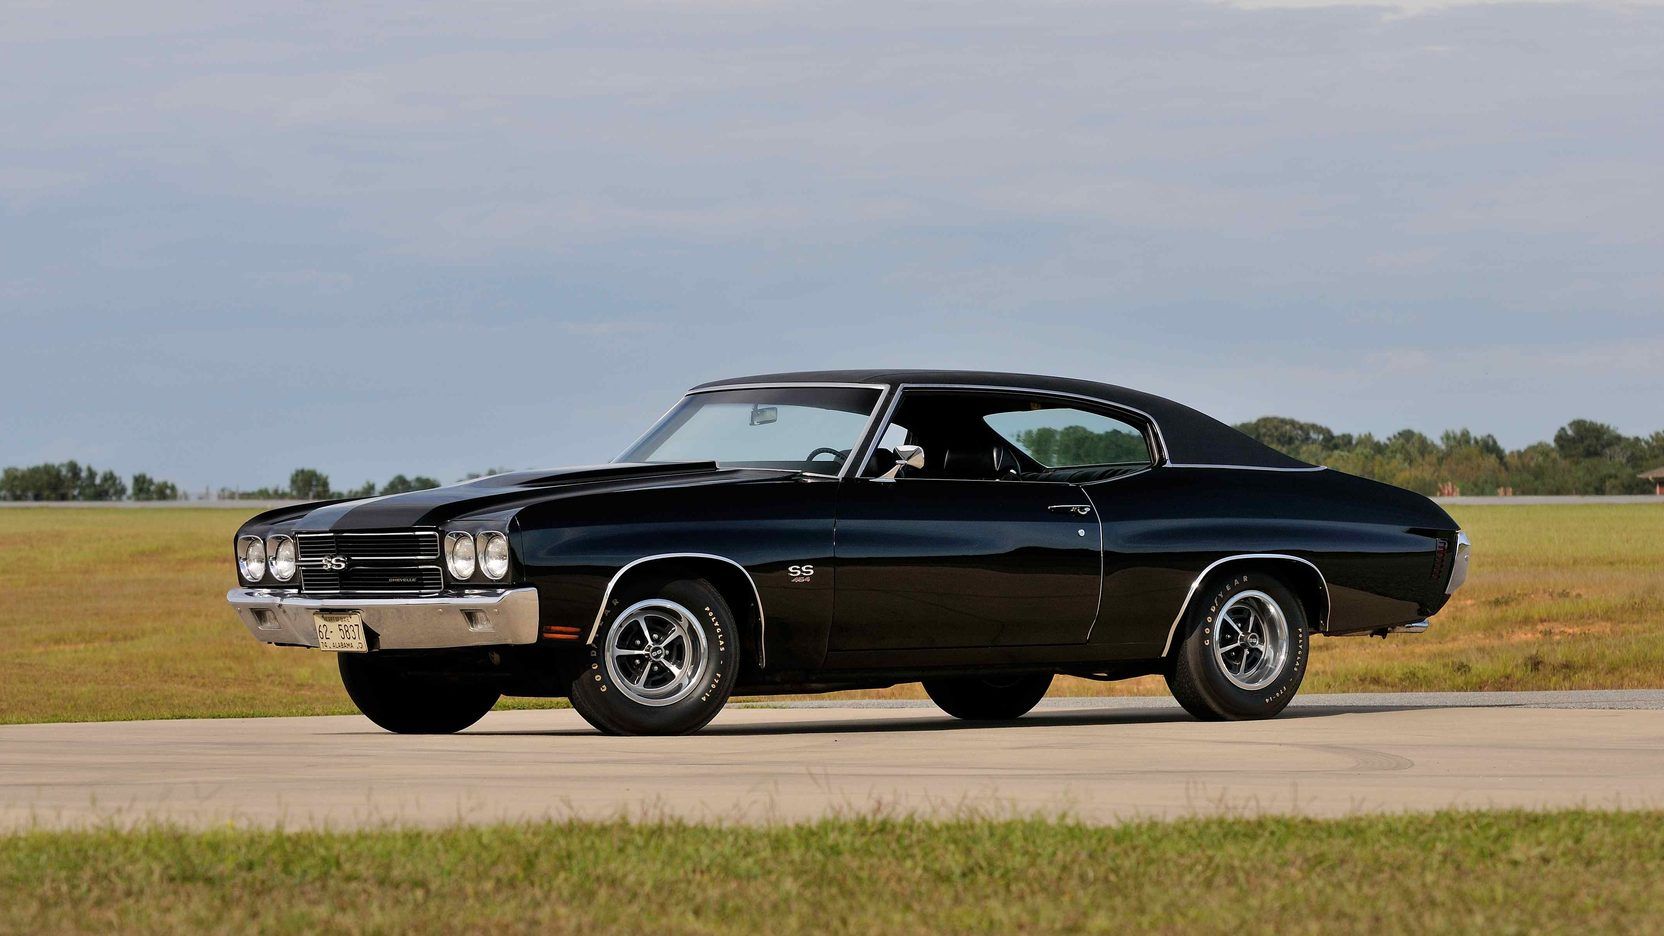 1970 Chevy Chevelle LS6 on the road